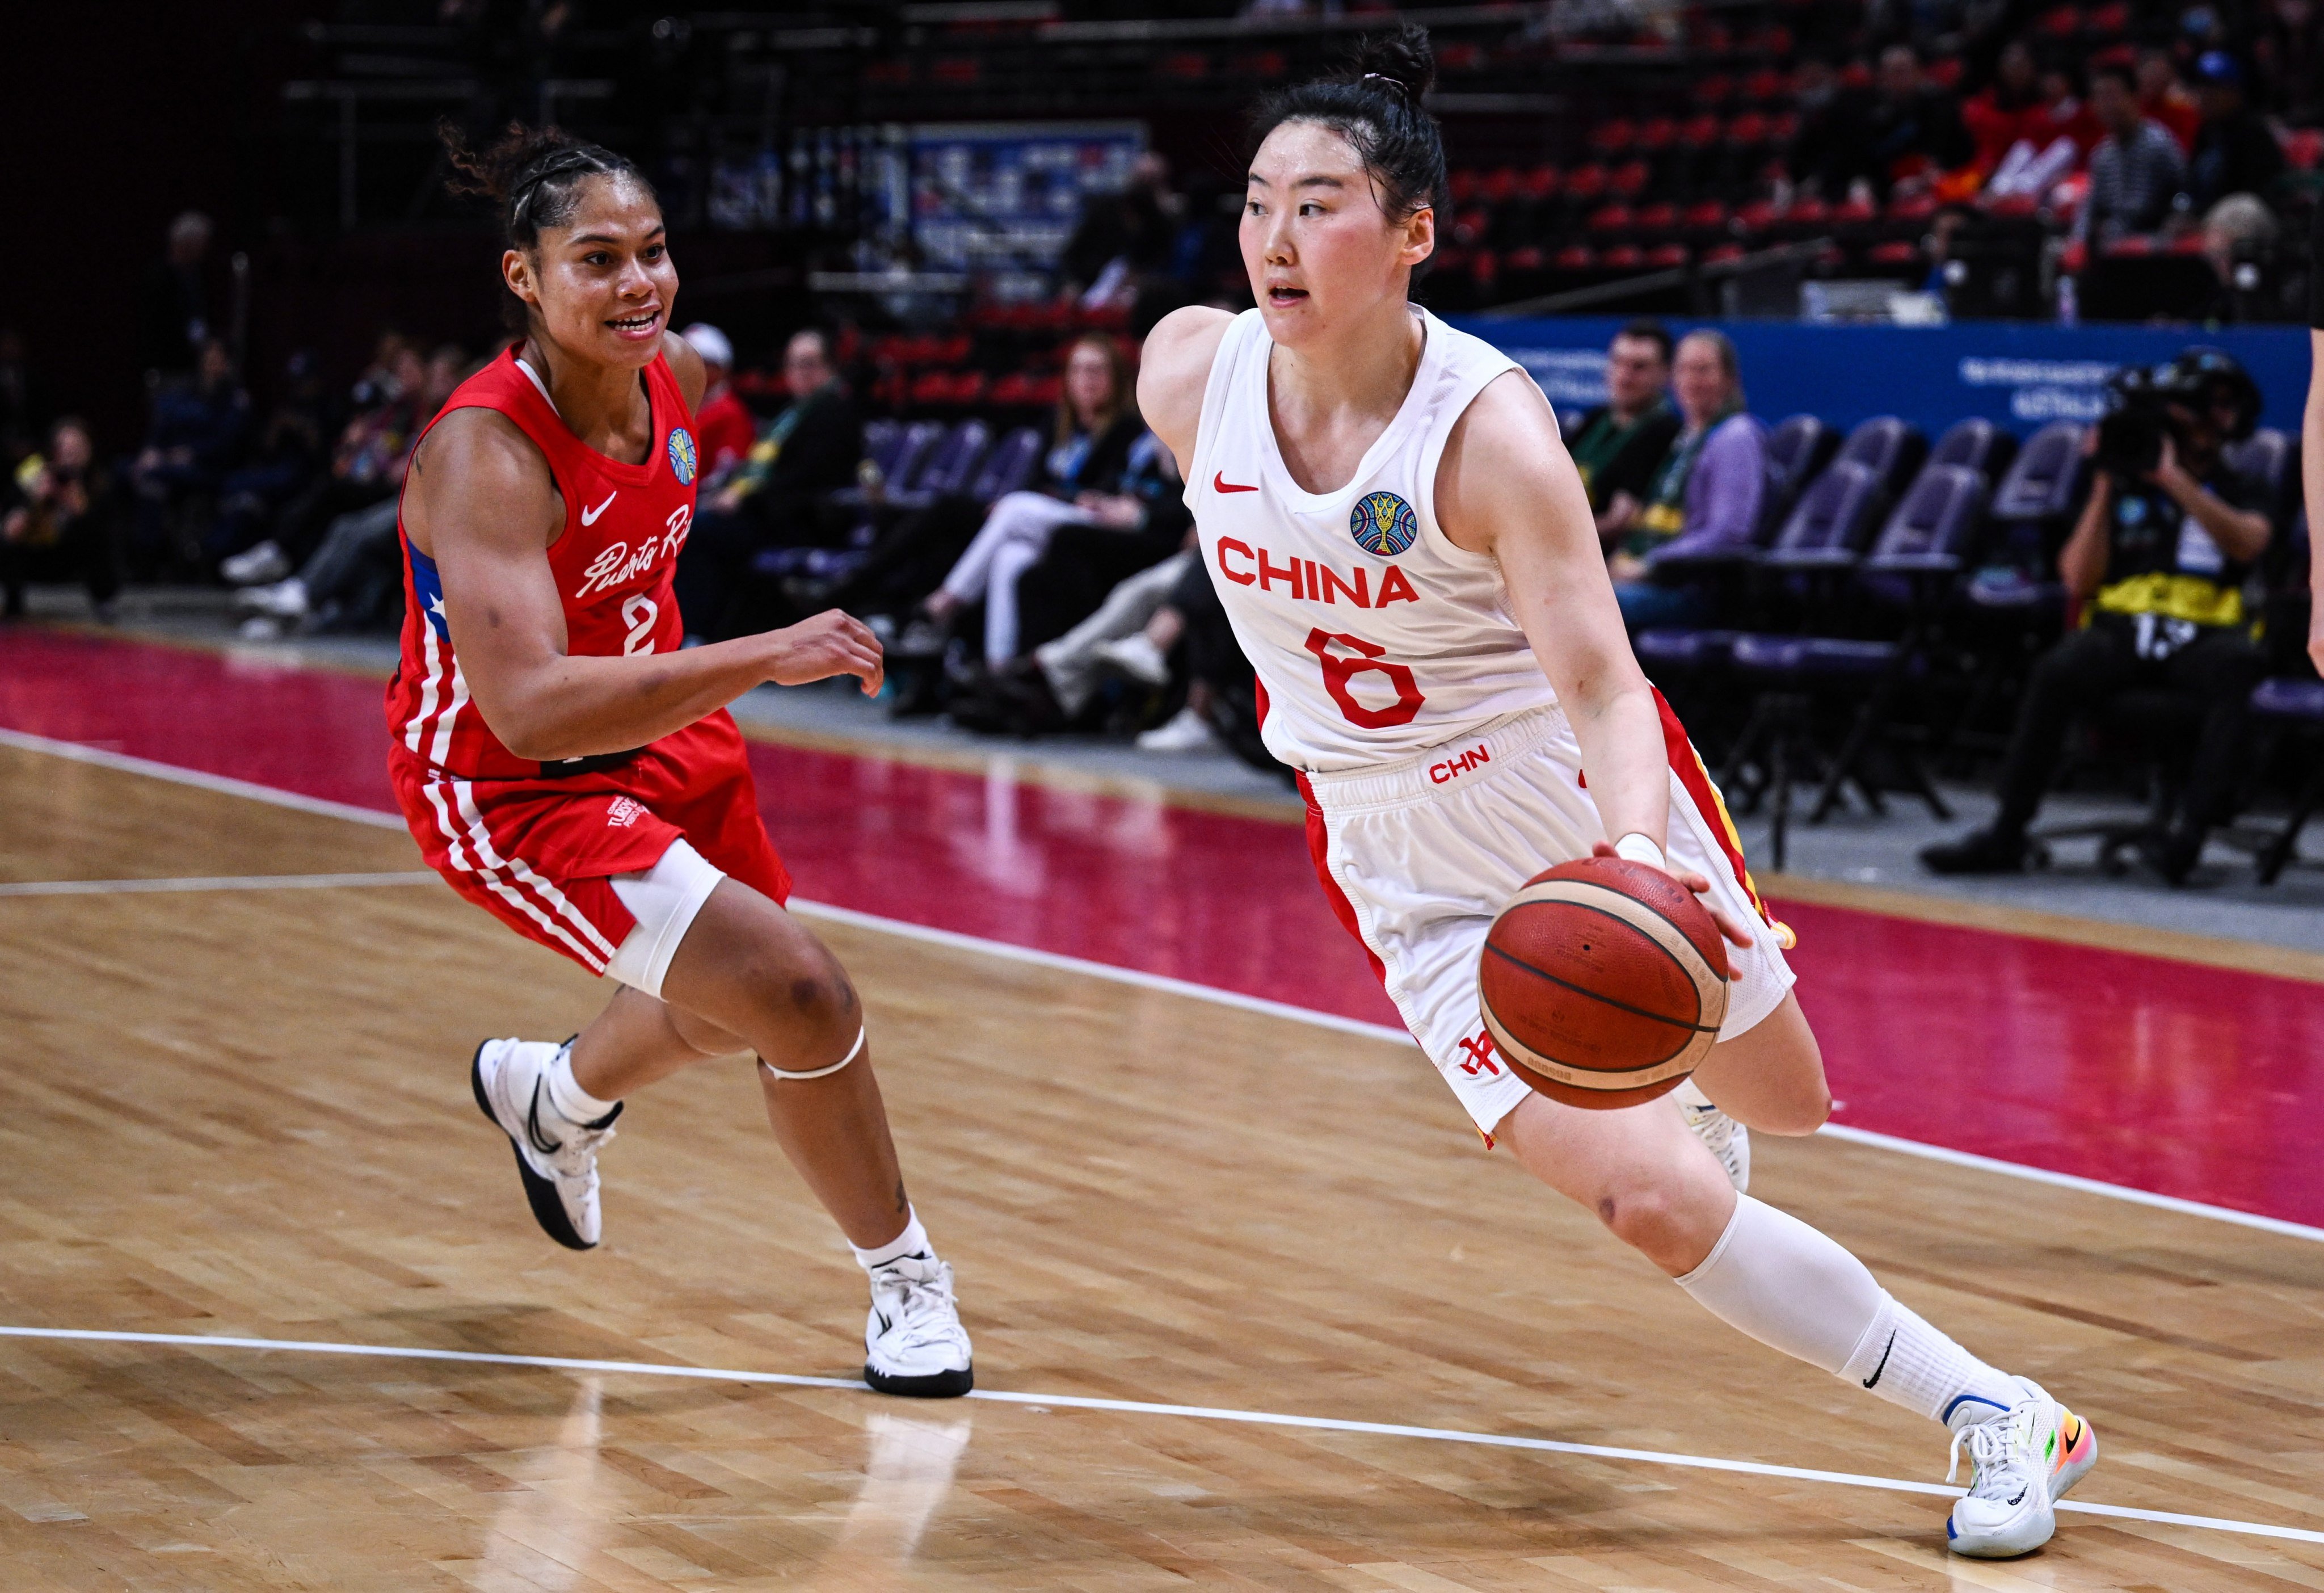 China’s Wu Tongtong (right) drives to the basket during her team’s Women’s Basketball World Cup match against Puerto Rico. Photo: EPA-EFE